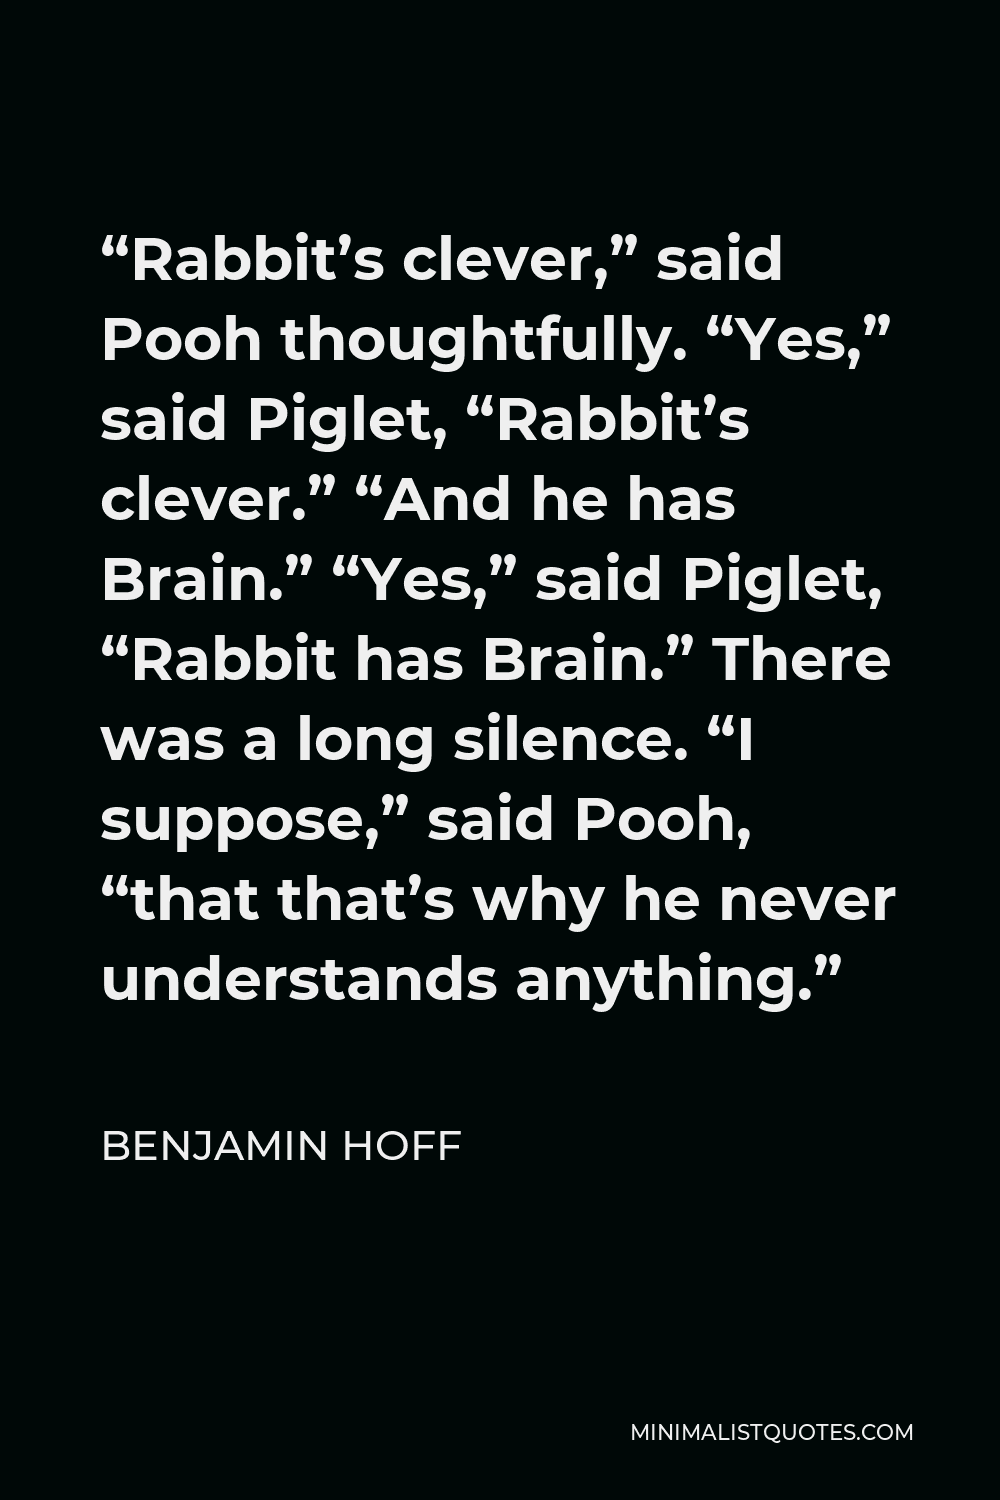 Benjamin Hoff Quote - “Rabbit’s clever,” said Pooh thoughtfully. “Yes,” said Piglet, “Rabbit’s clever.” “And he has Brain.” “Yes,” said Piglet, “Rabbit has Brain.” There was a long silence. “I suppose,” said Pooh, “that that’s why he never understands anything.”